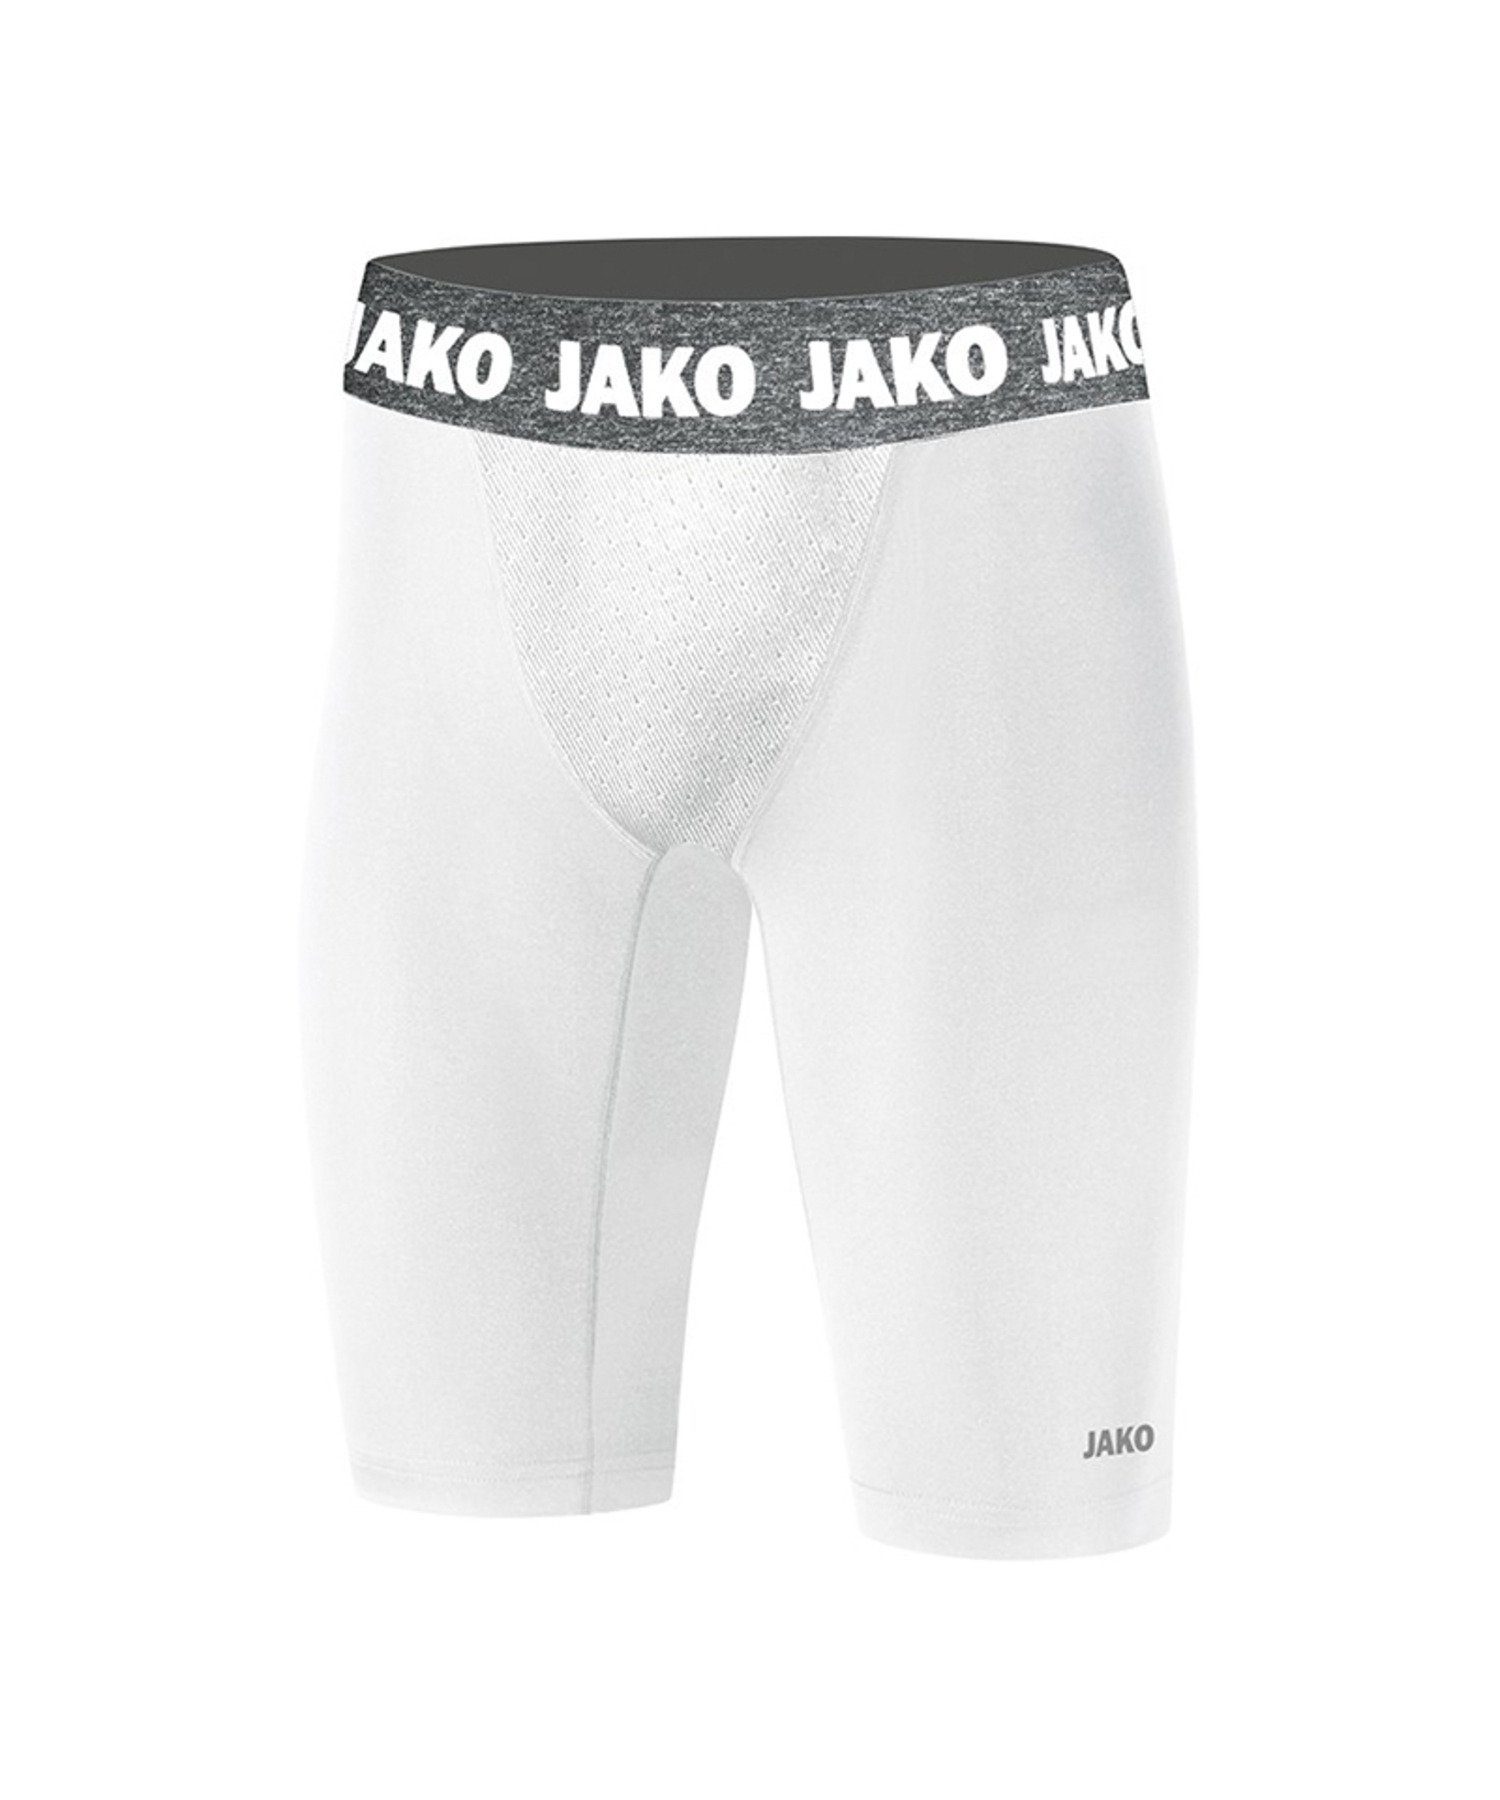 weiss Funktionshose Short 2.0 Tight Compression Jako